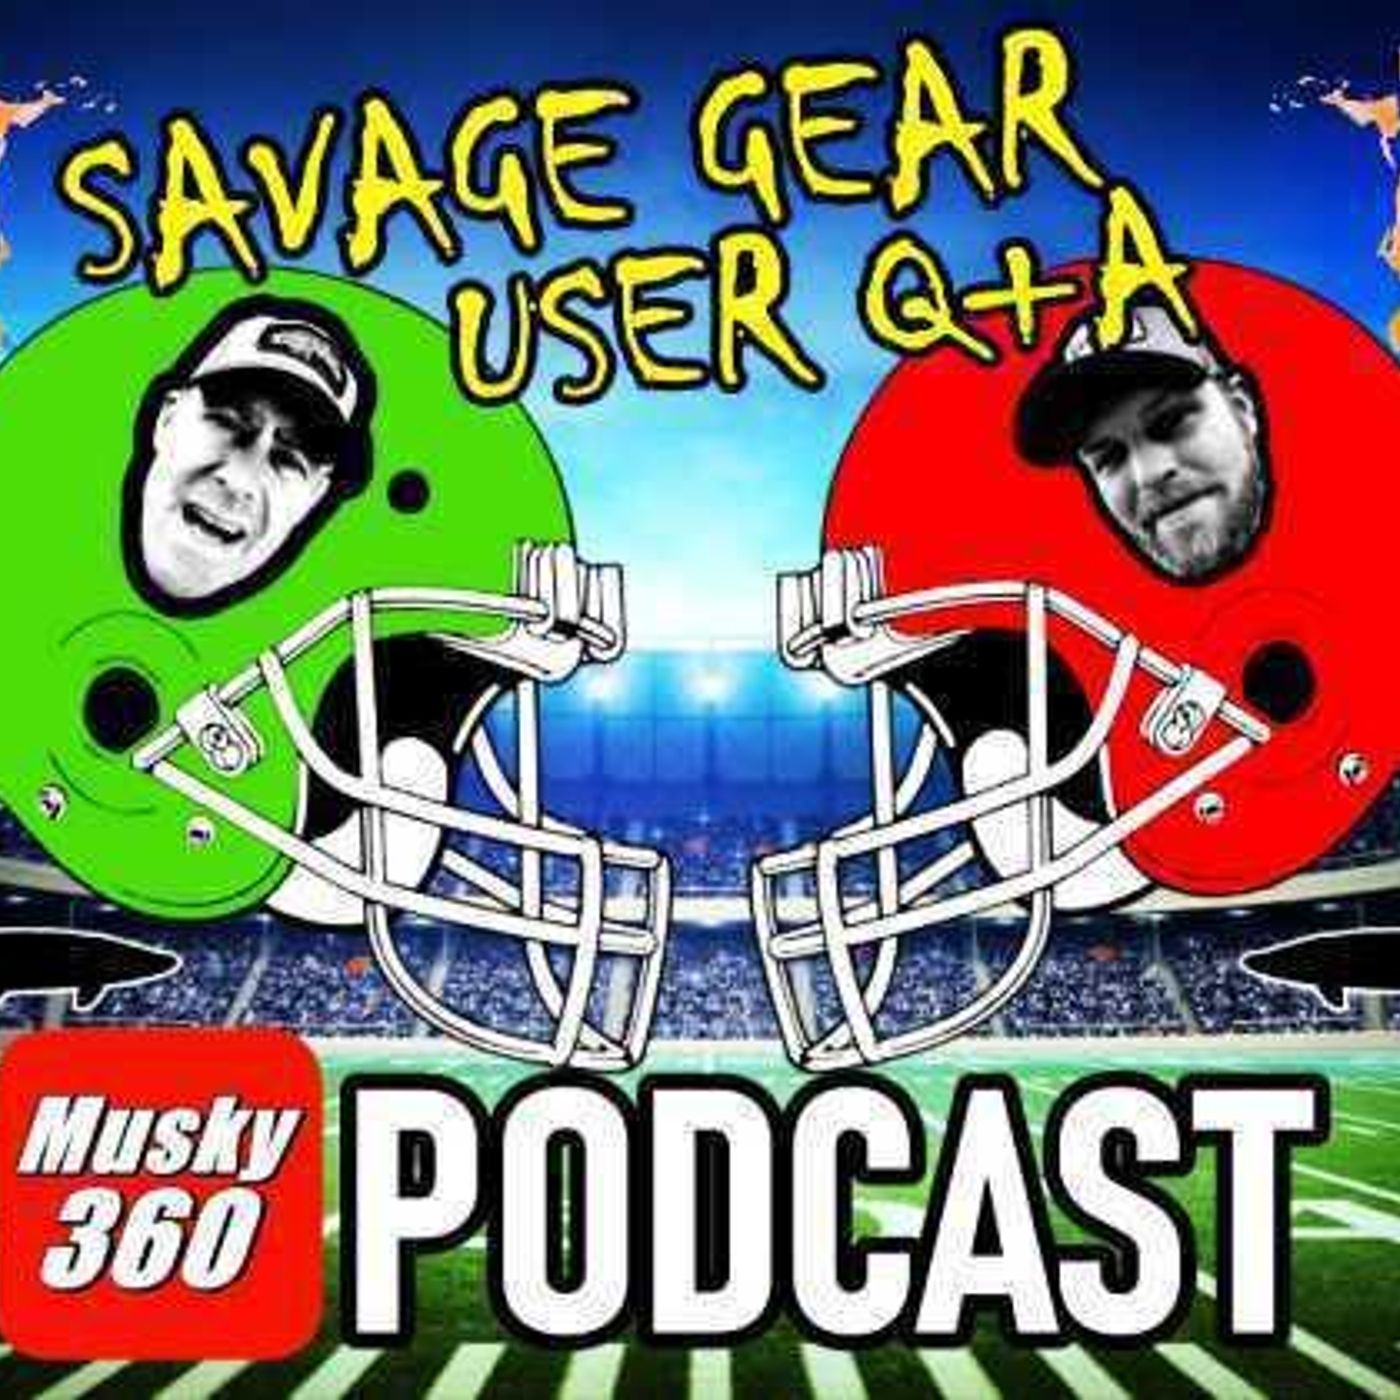 223: Savage Gear Musky Lures and User Q+A